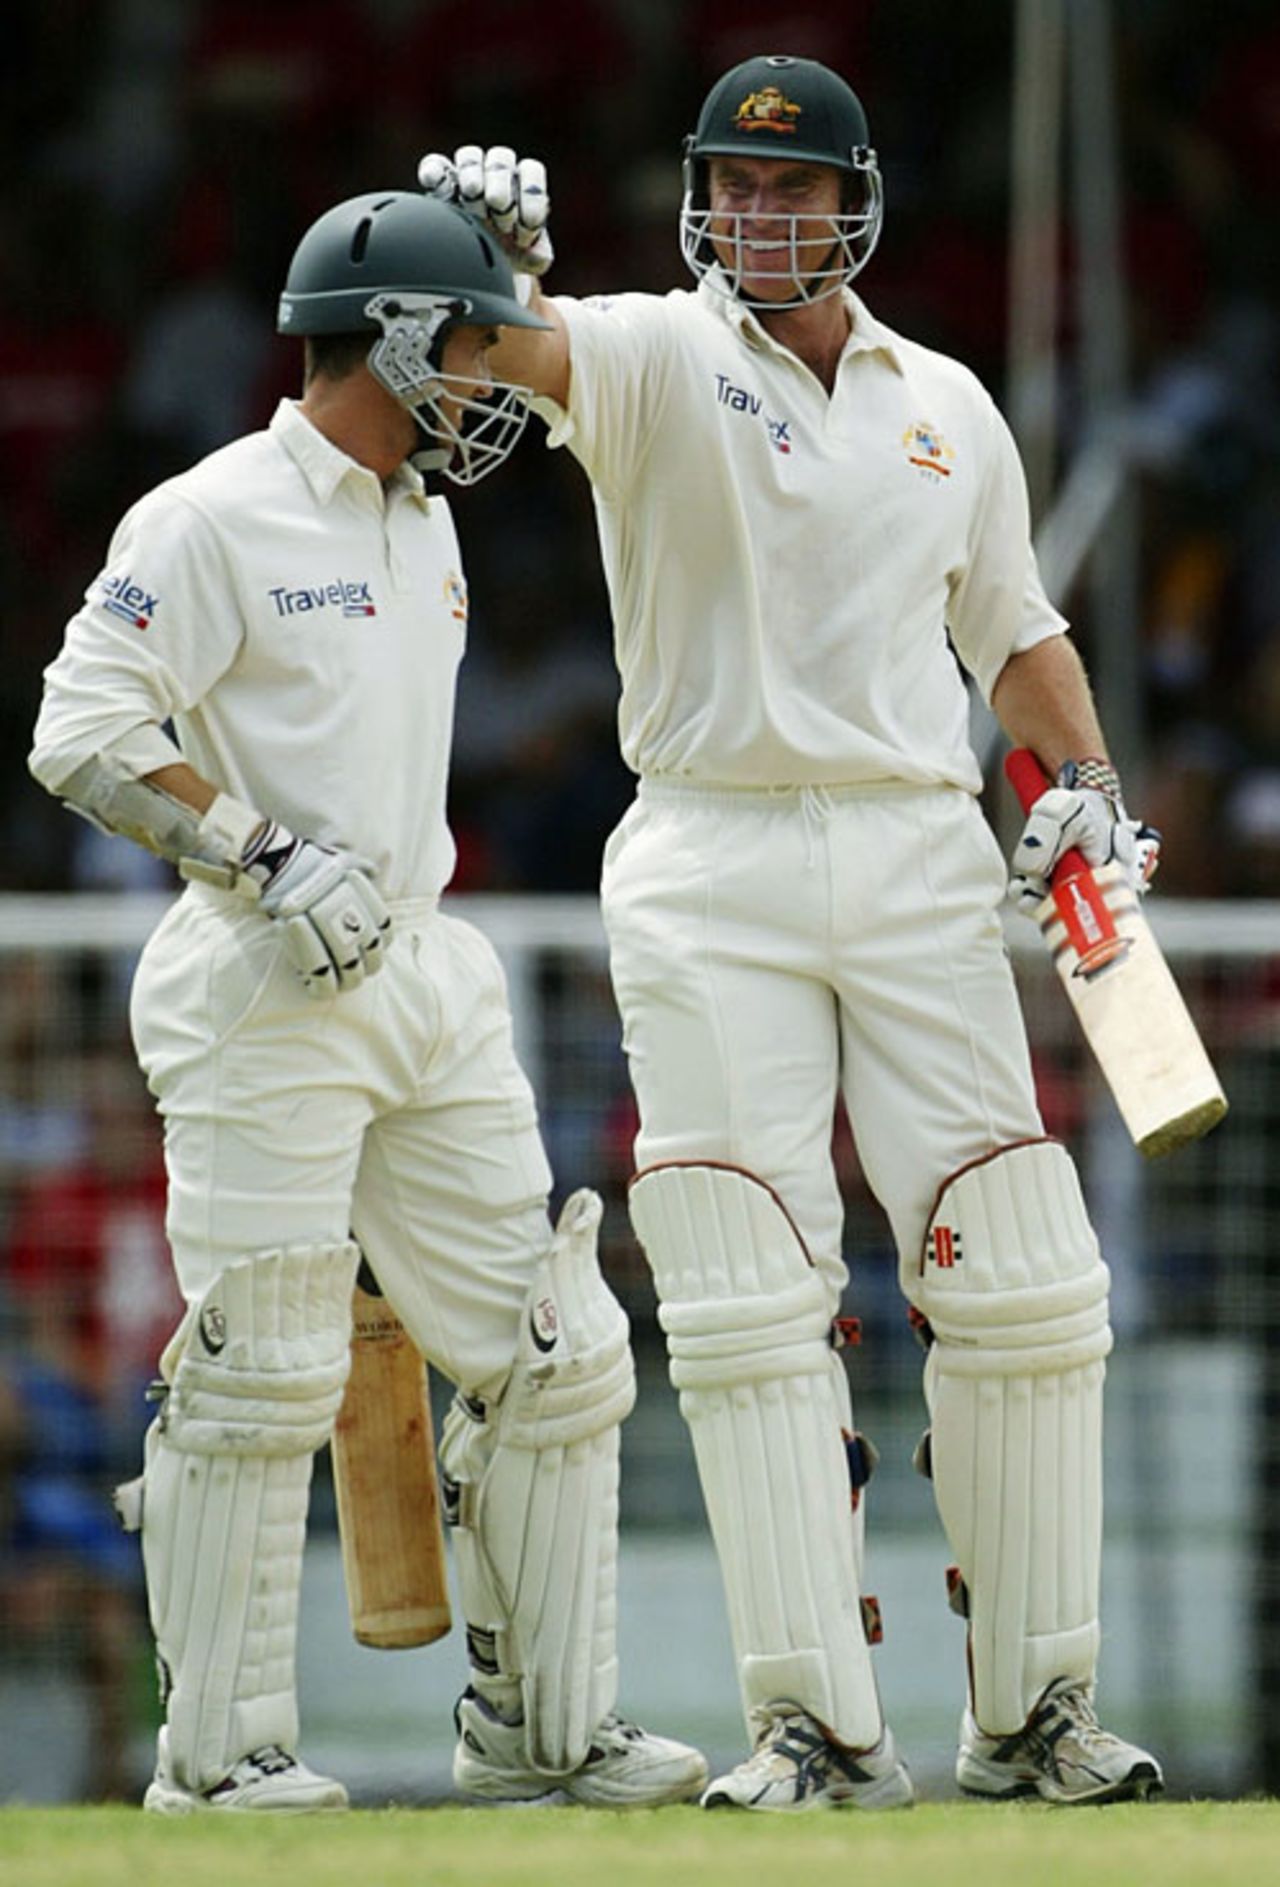 Justin Langer and Matthew Hayden celebrate their double-century opening partnership, West Indies v Australia, 4th Test, Anitgua, 3rd day, March 11, 2003